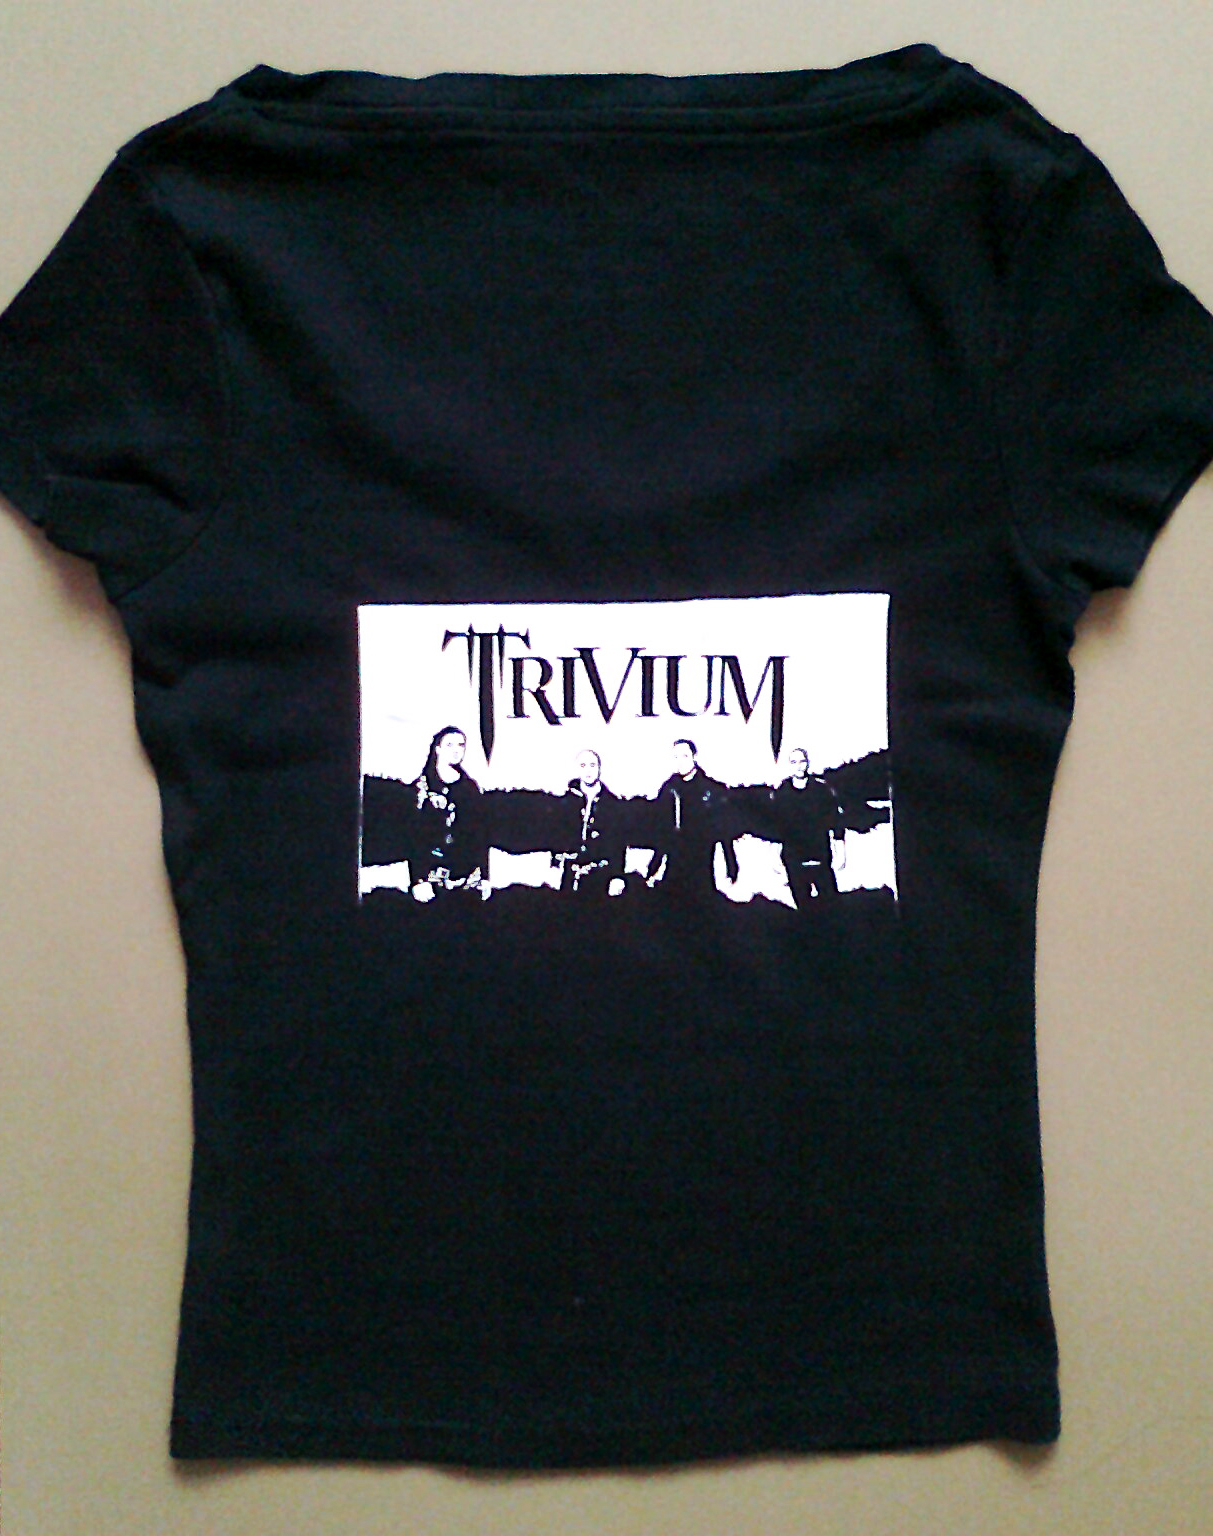 My New T-Shirt_Trivium (back view) by Trix92